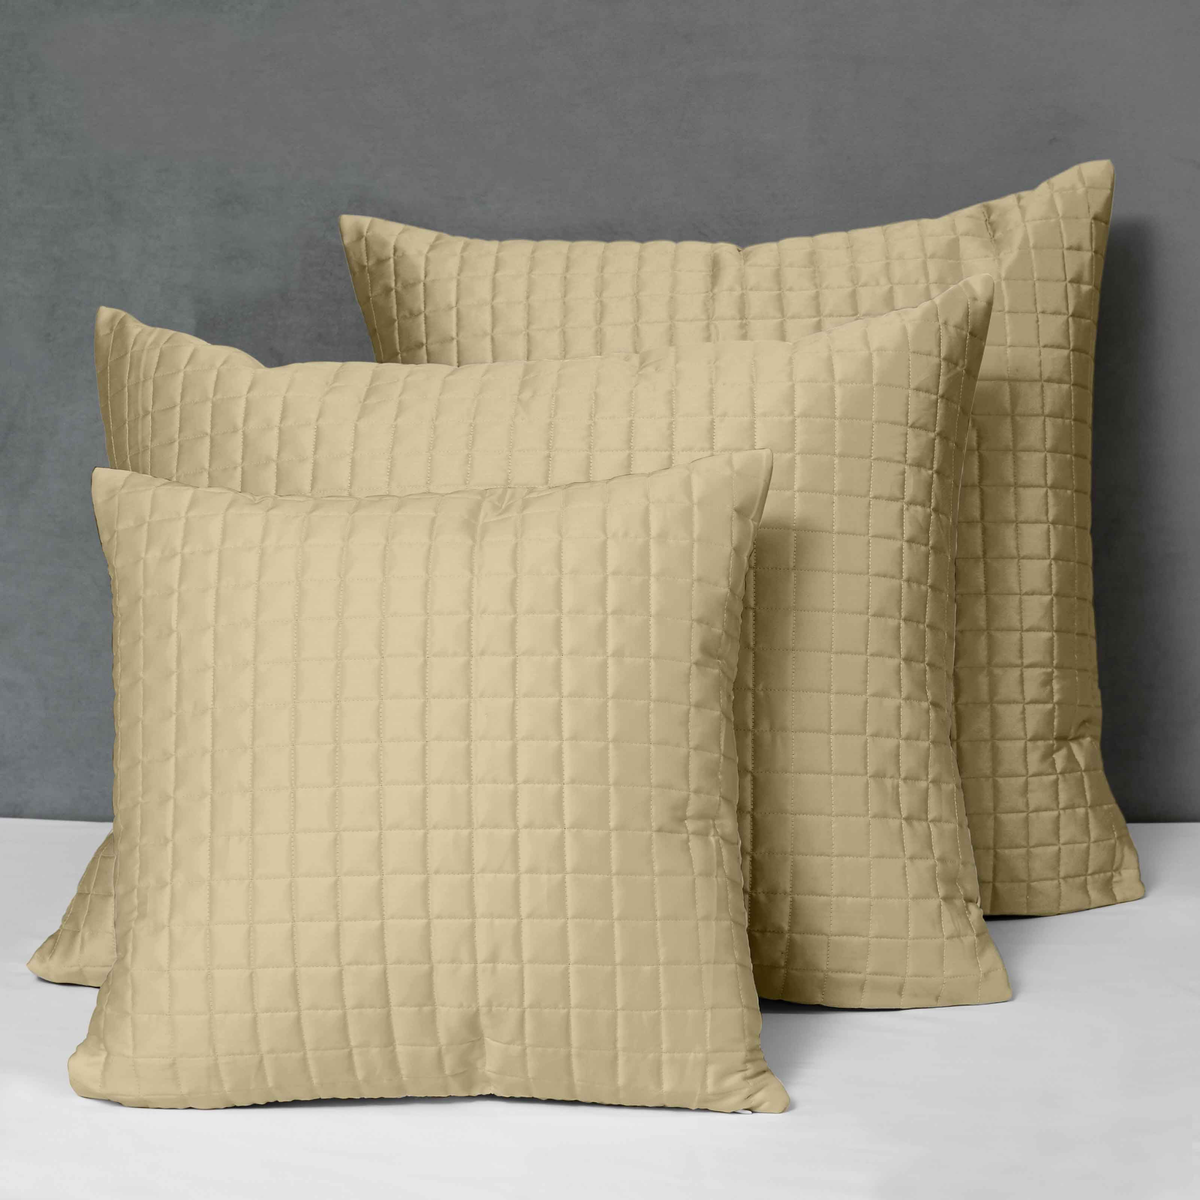 Different Sizes of Quilted Shams of Signoria Masaccio Bedding in Taupe Color